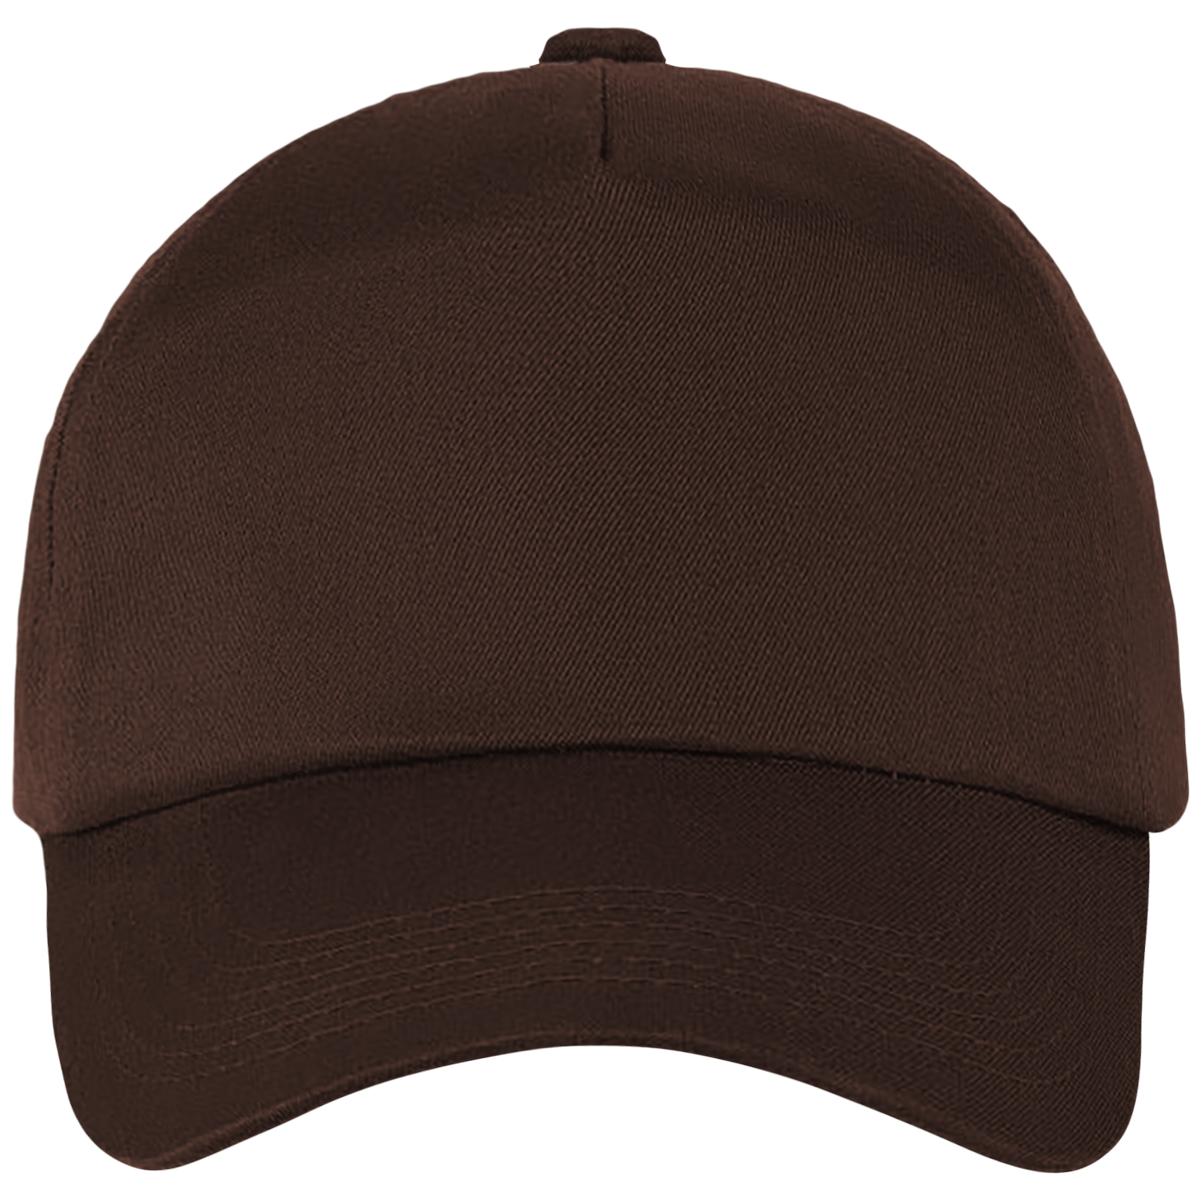 Customizable Fashion Cap In Embroidery And Printing Chocolate